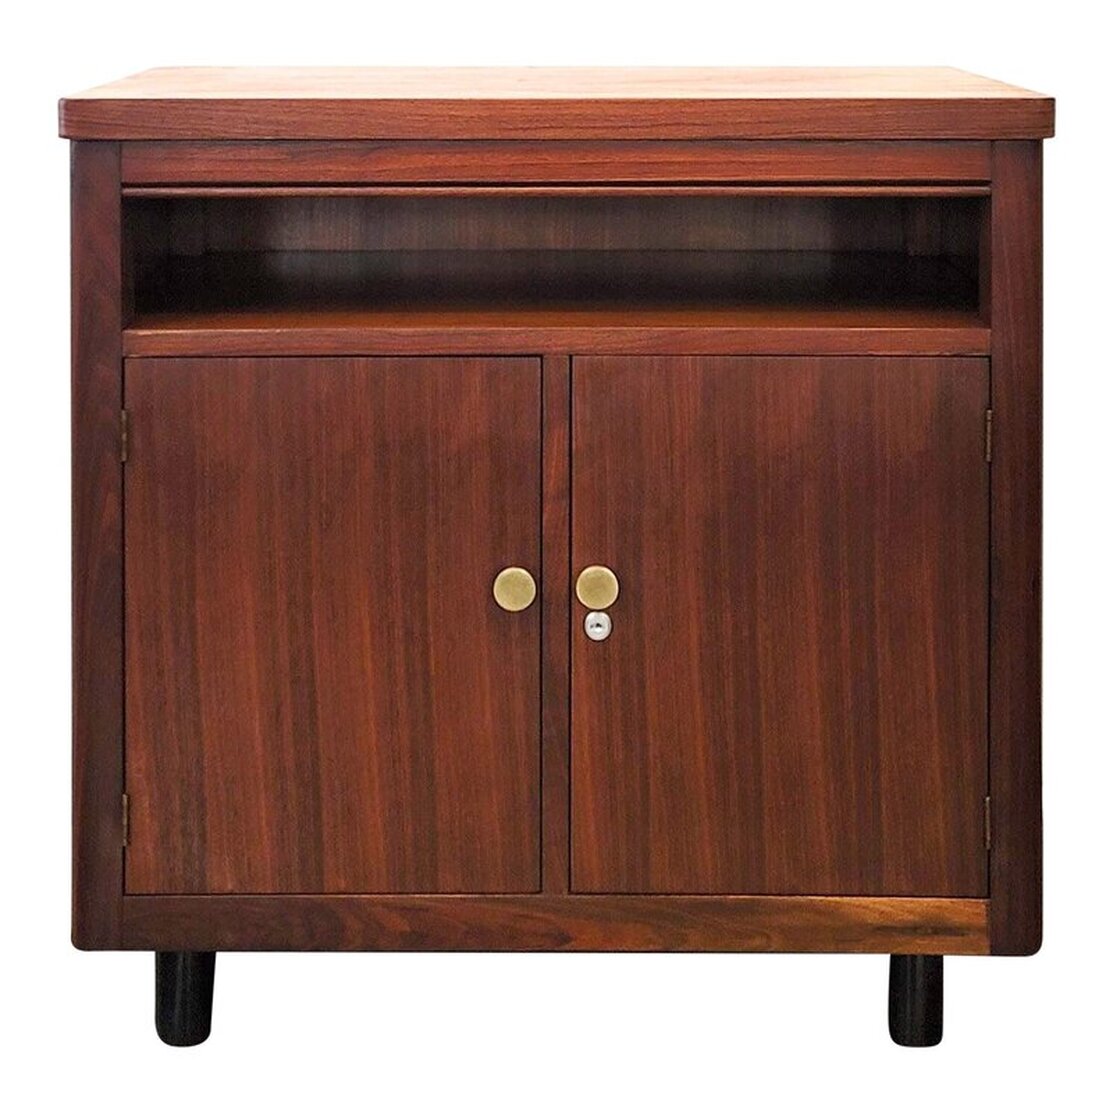 Nightstands and Cabinets - Danish Modern San Diego